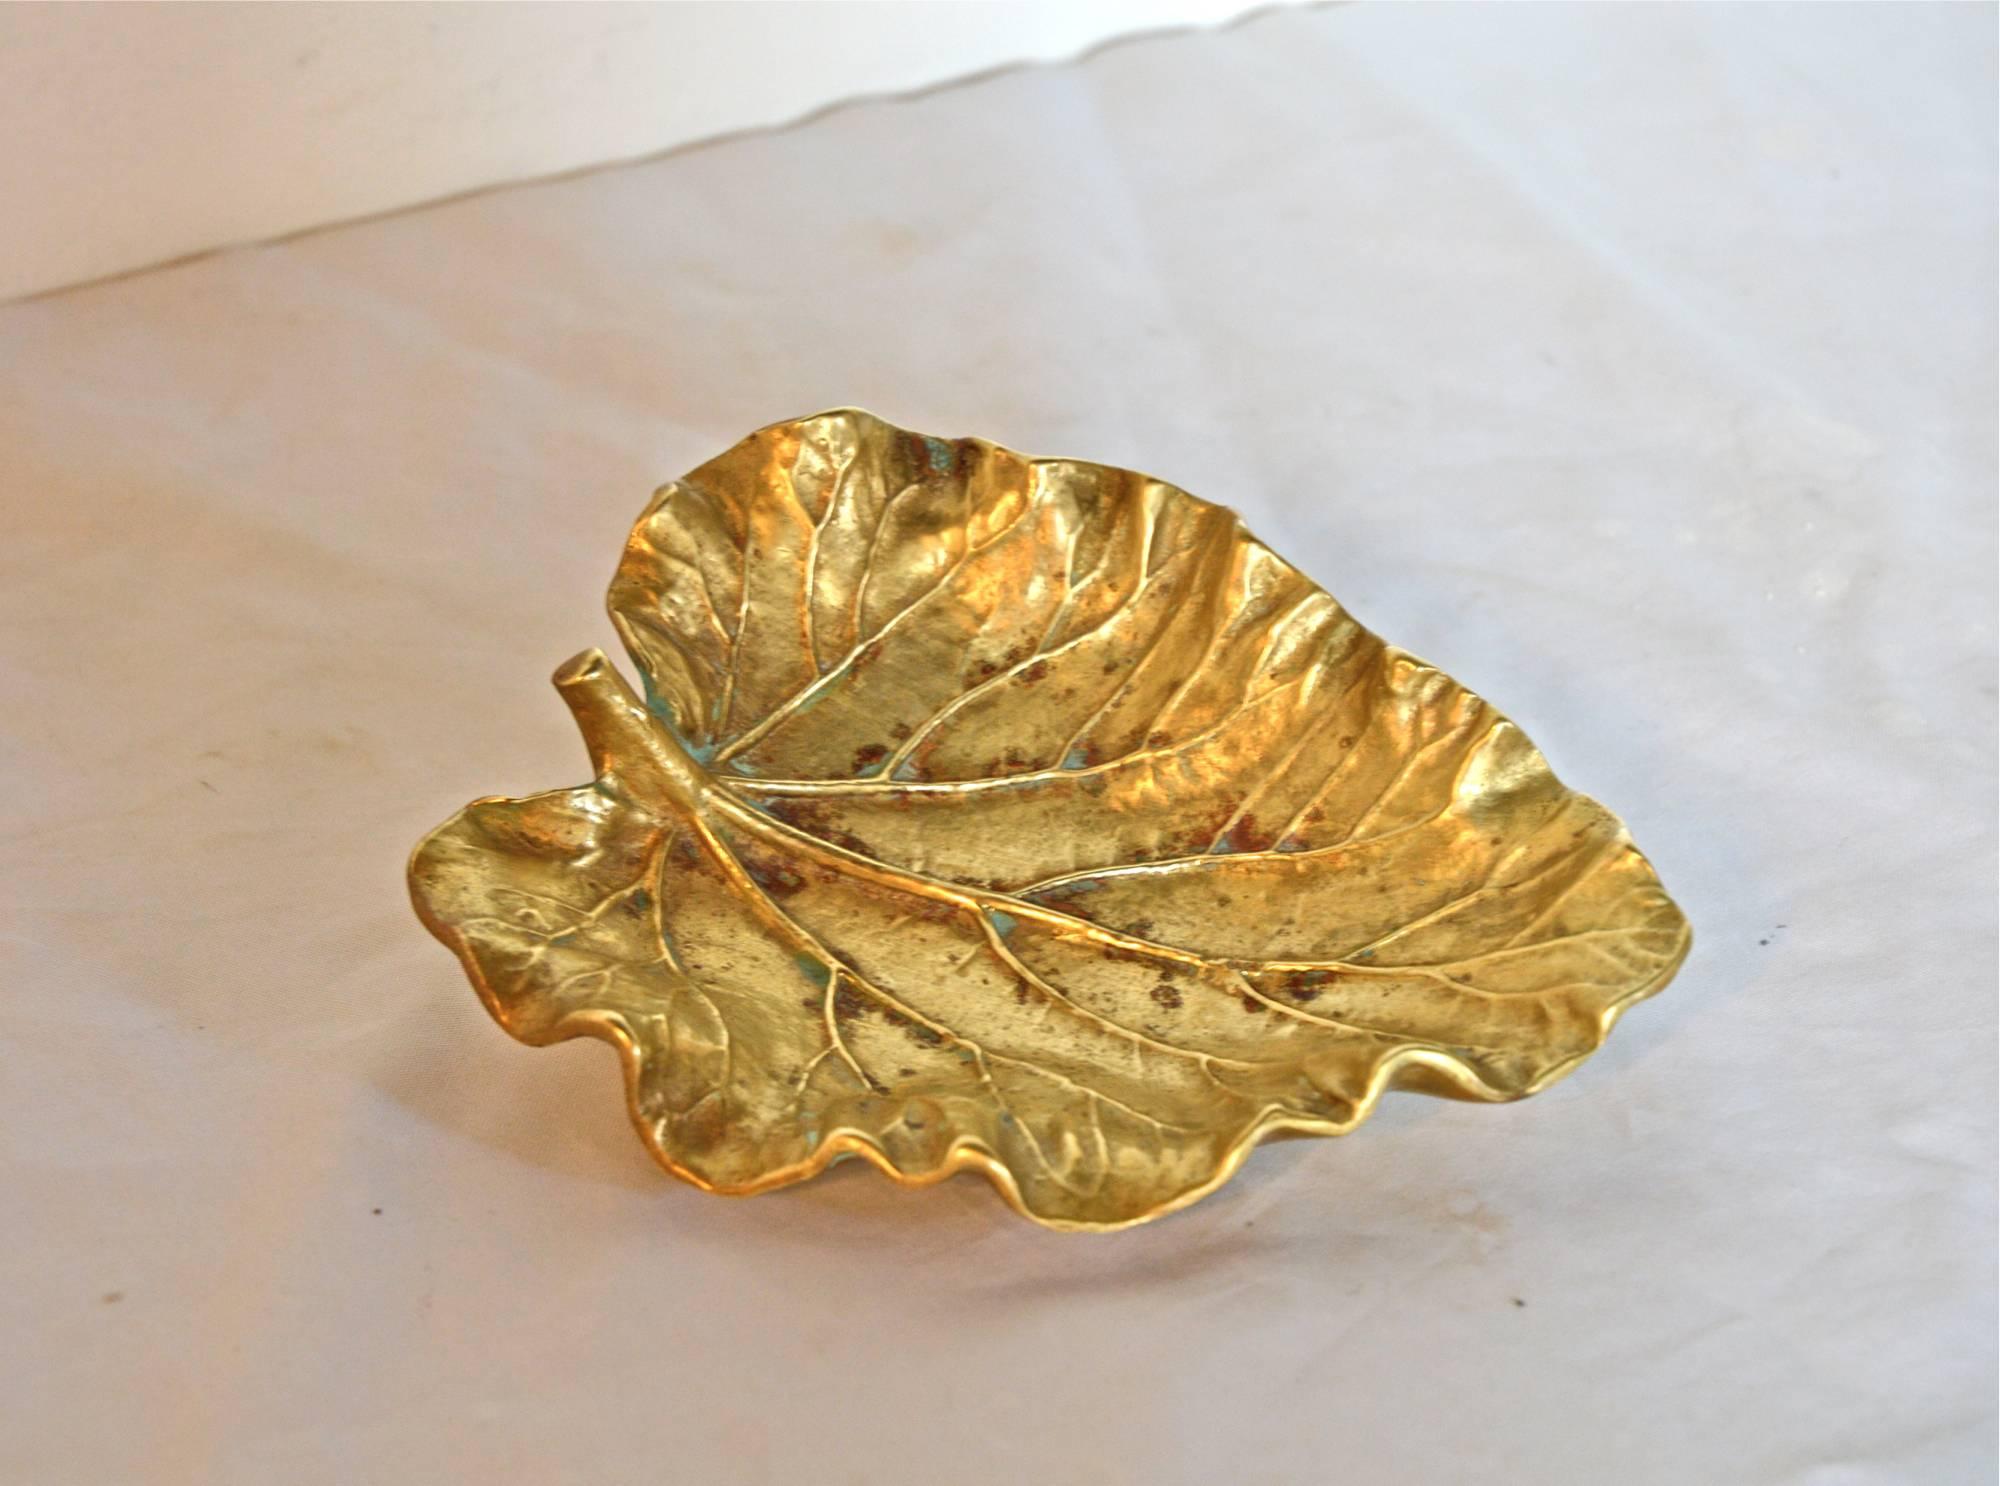 A stunning and highly detailed brass casting of a rhubarb leaf which makes a highly versatile candy dish, catch all or jewelry keep. Stamped Virginia Metalcrafters, copyright 1948.